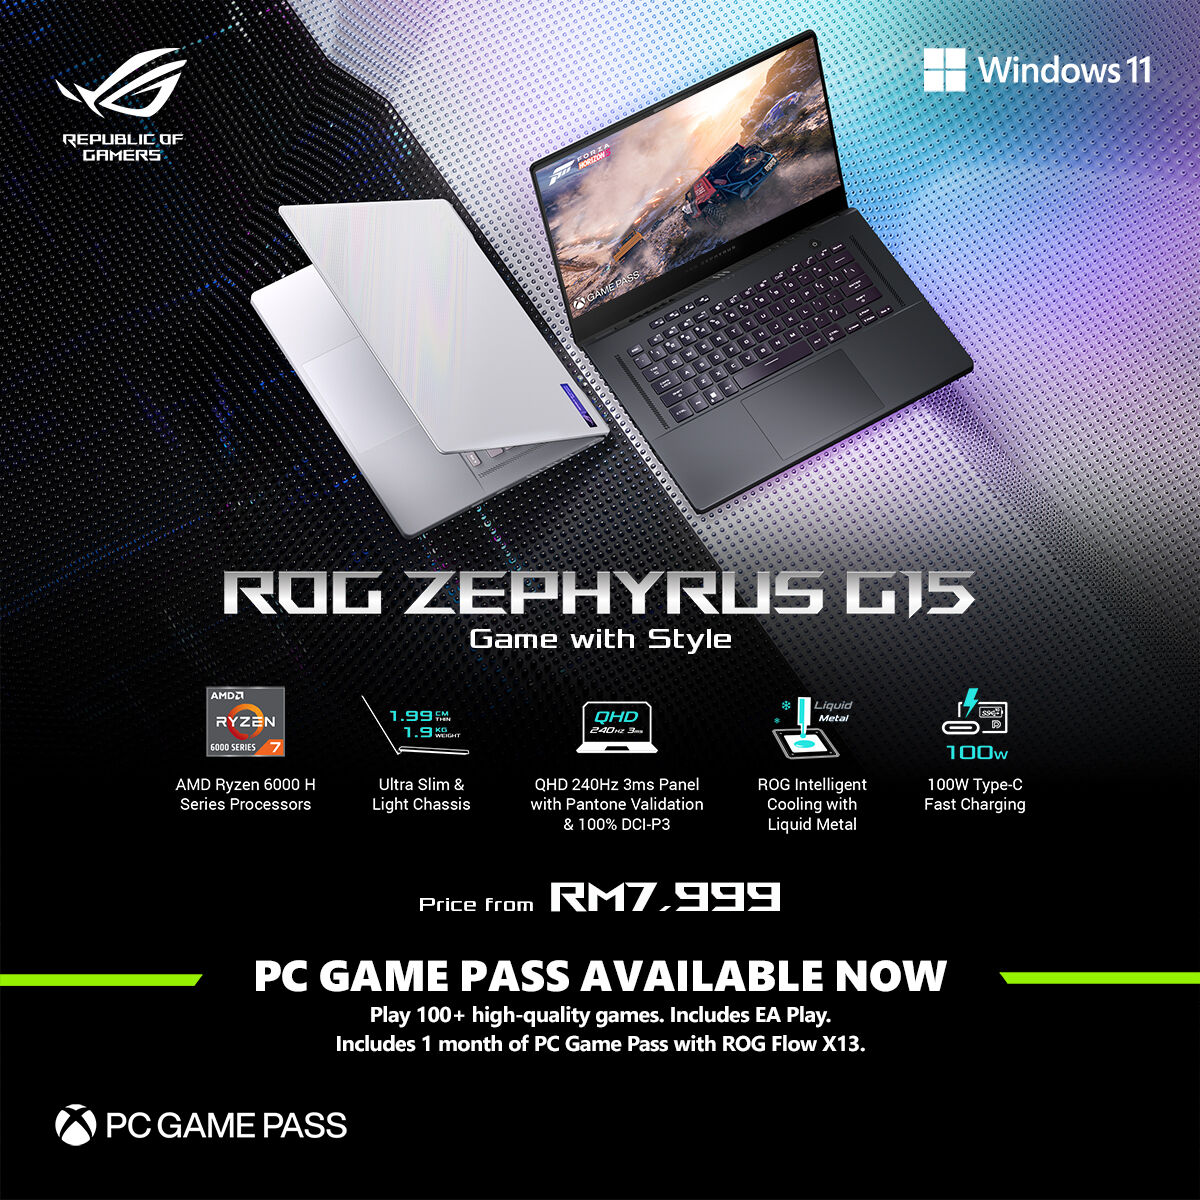 Asus ROG Reveals Zephyrus G14 and G15